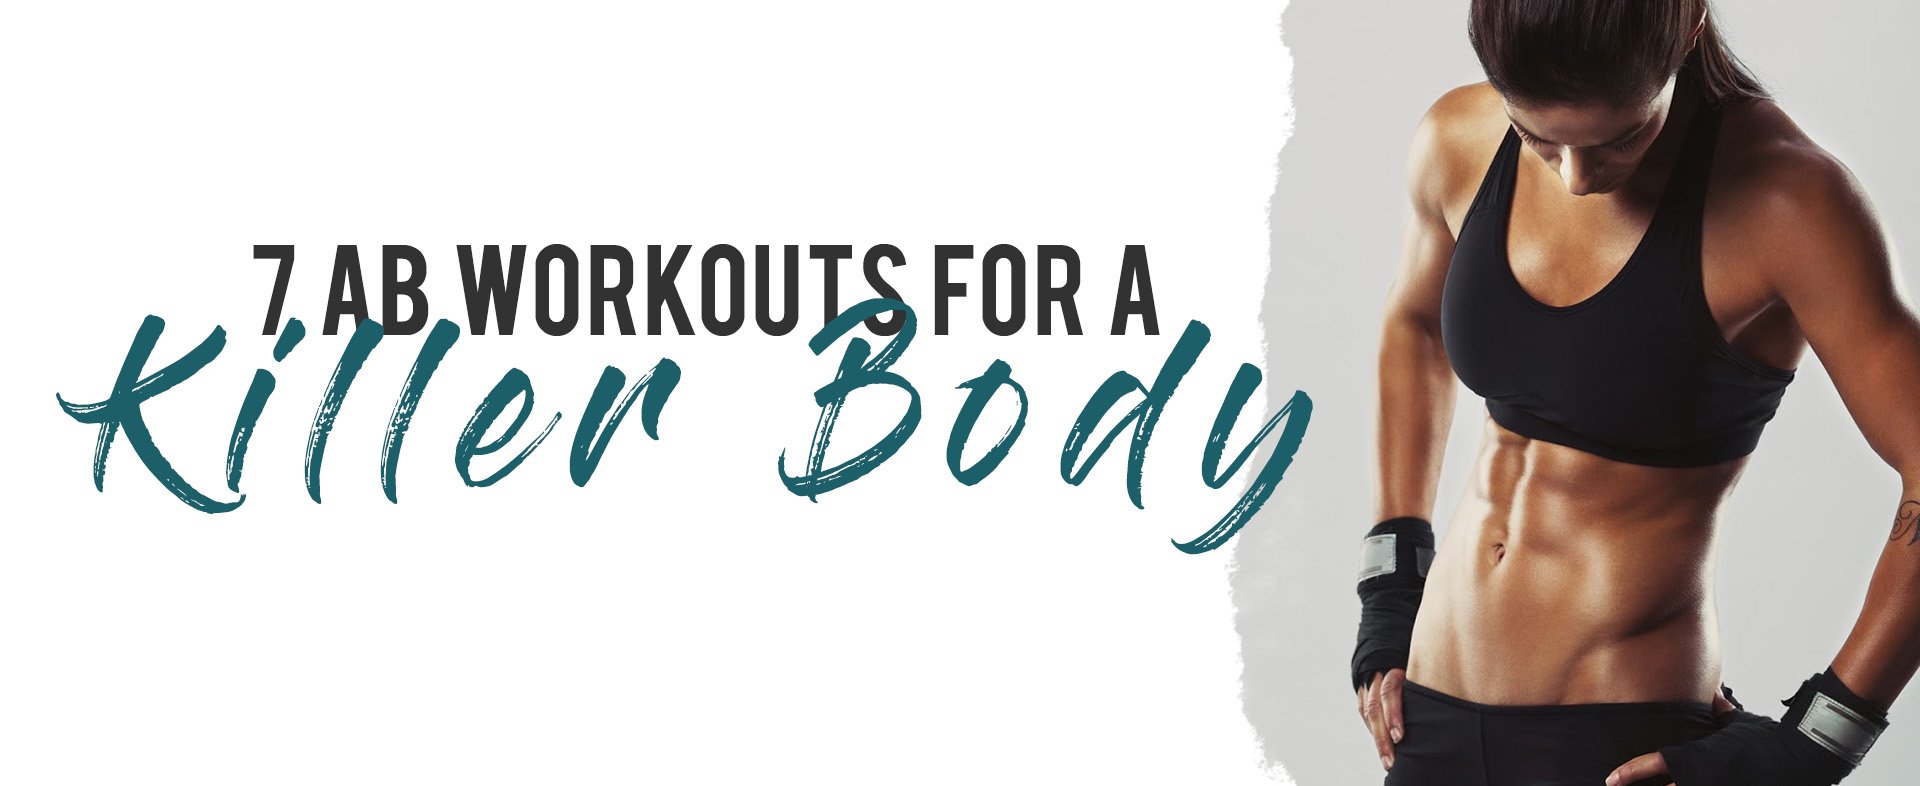 7 Ab Workouts For A Killer Body